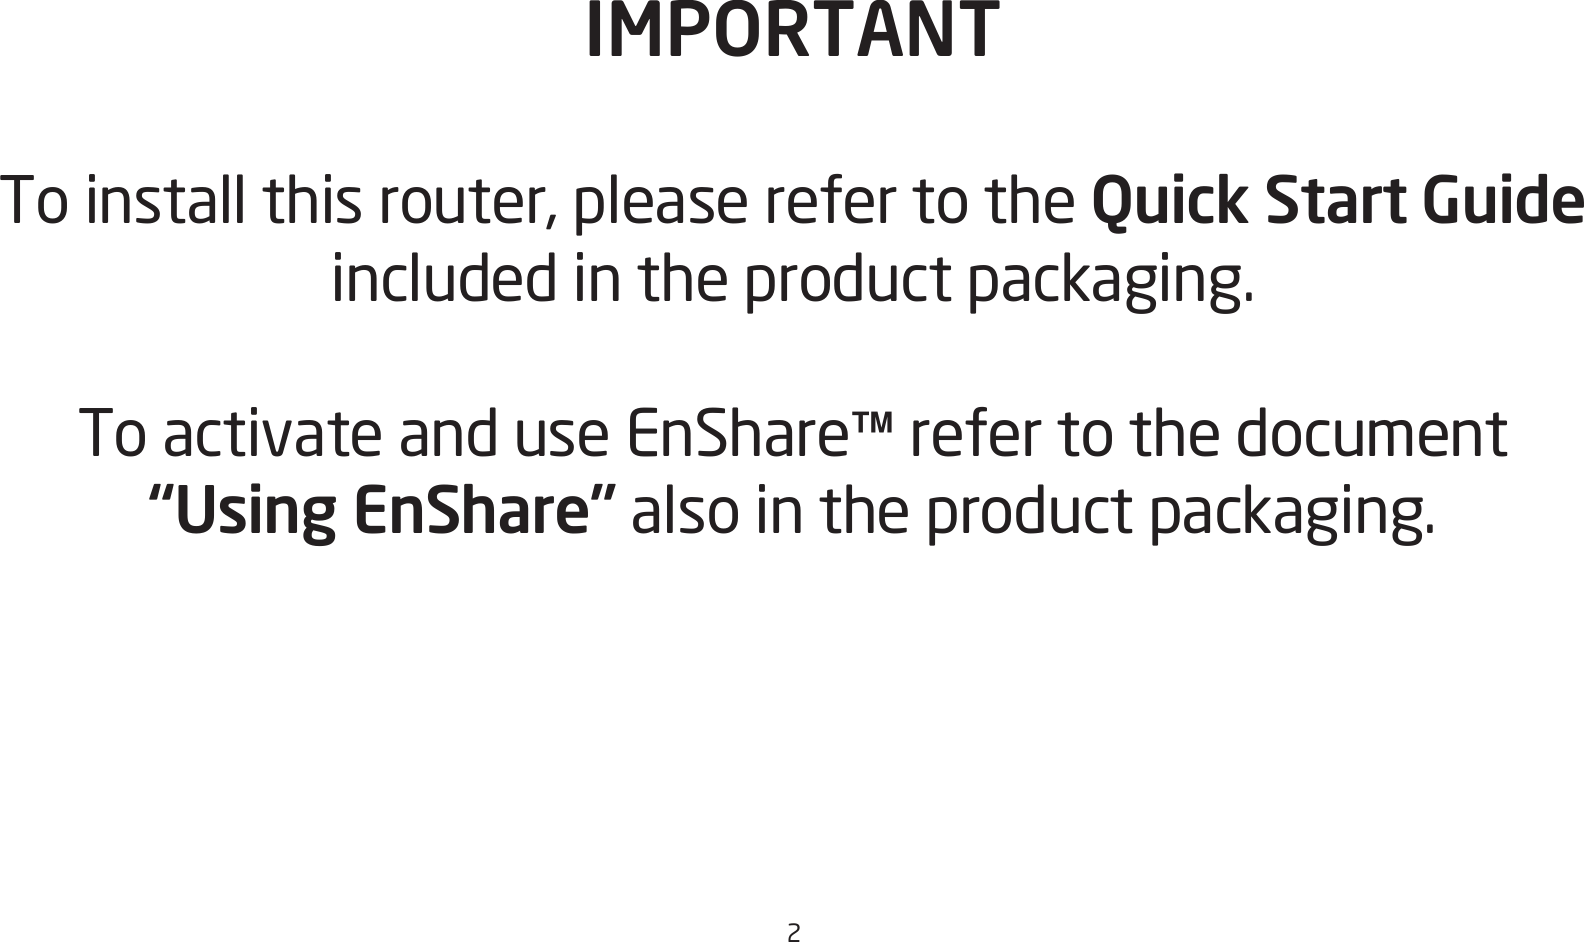 2IMPORTANTTo install this router, please refer to the Quick Start Guide included in the product packaging.To activate and use EnShare™ refer to the document “Using EnShare” also in the product packaging.